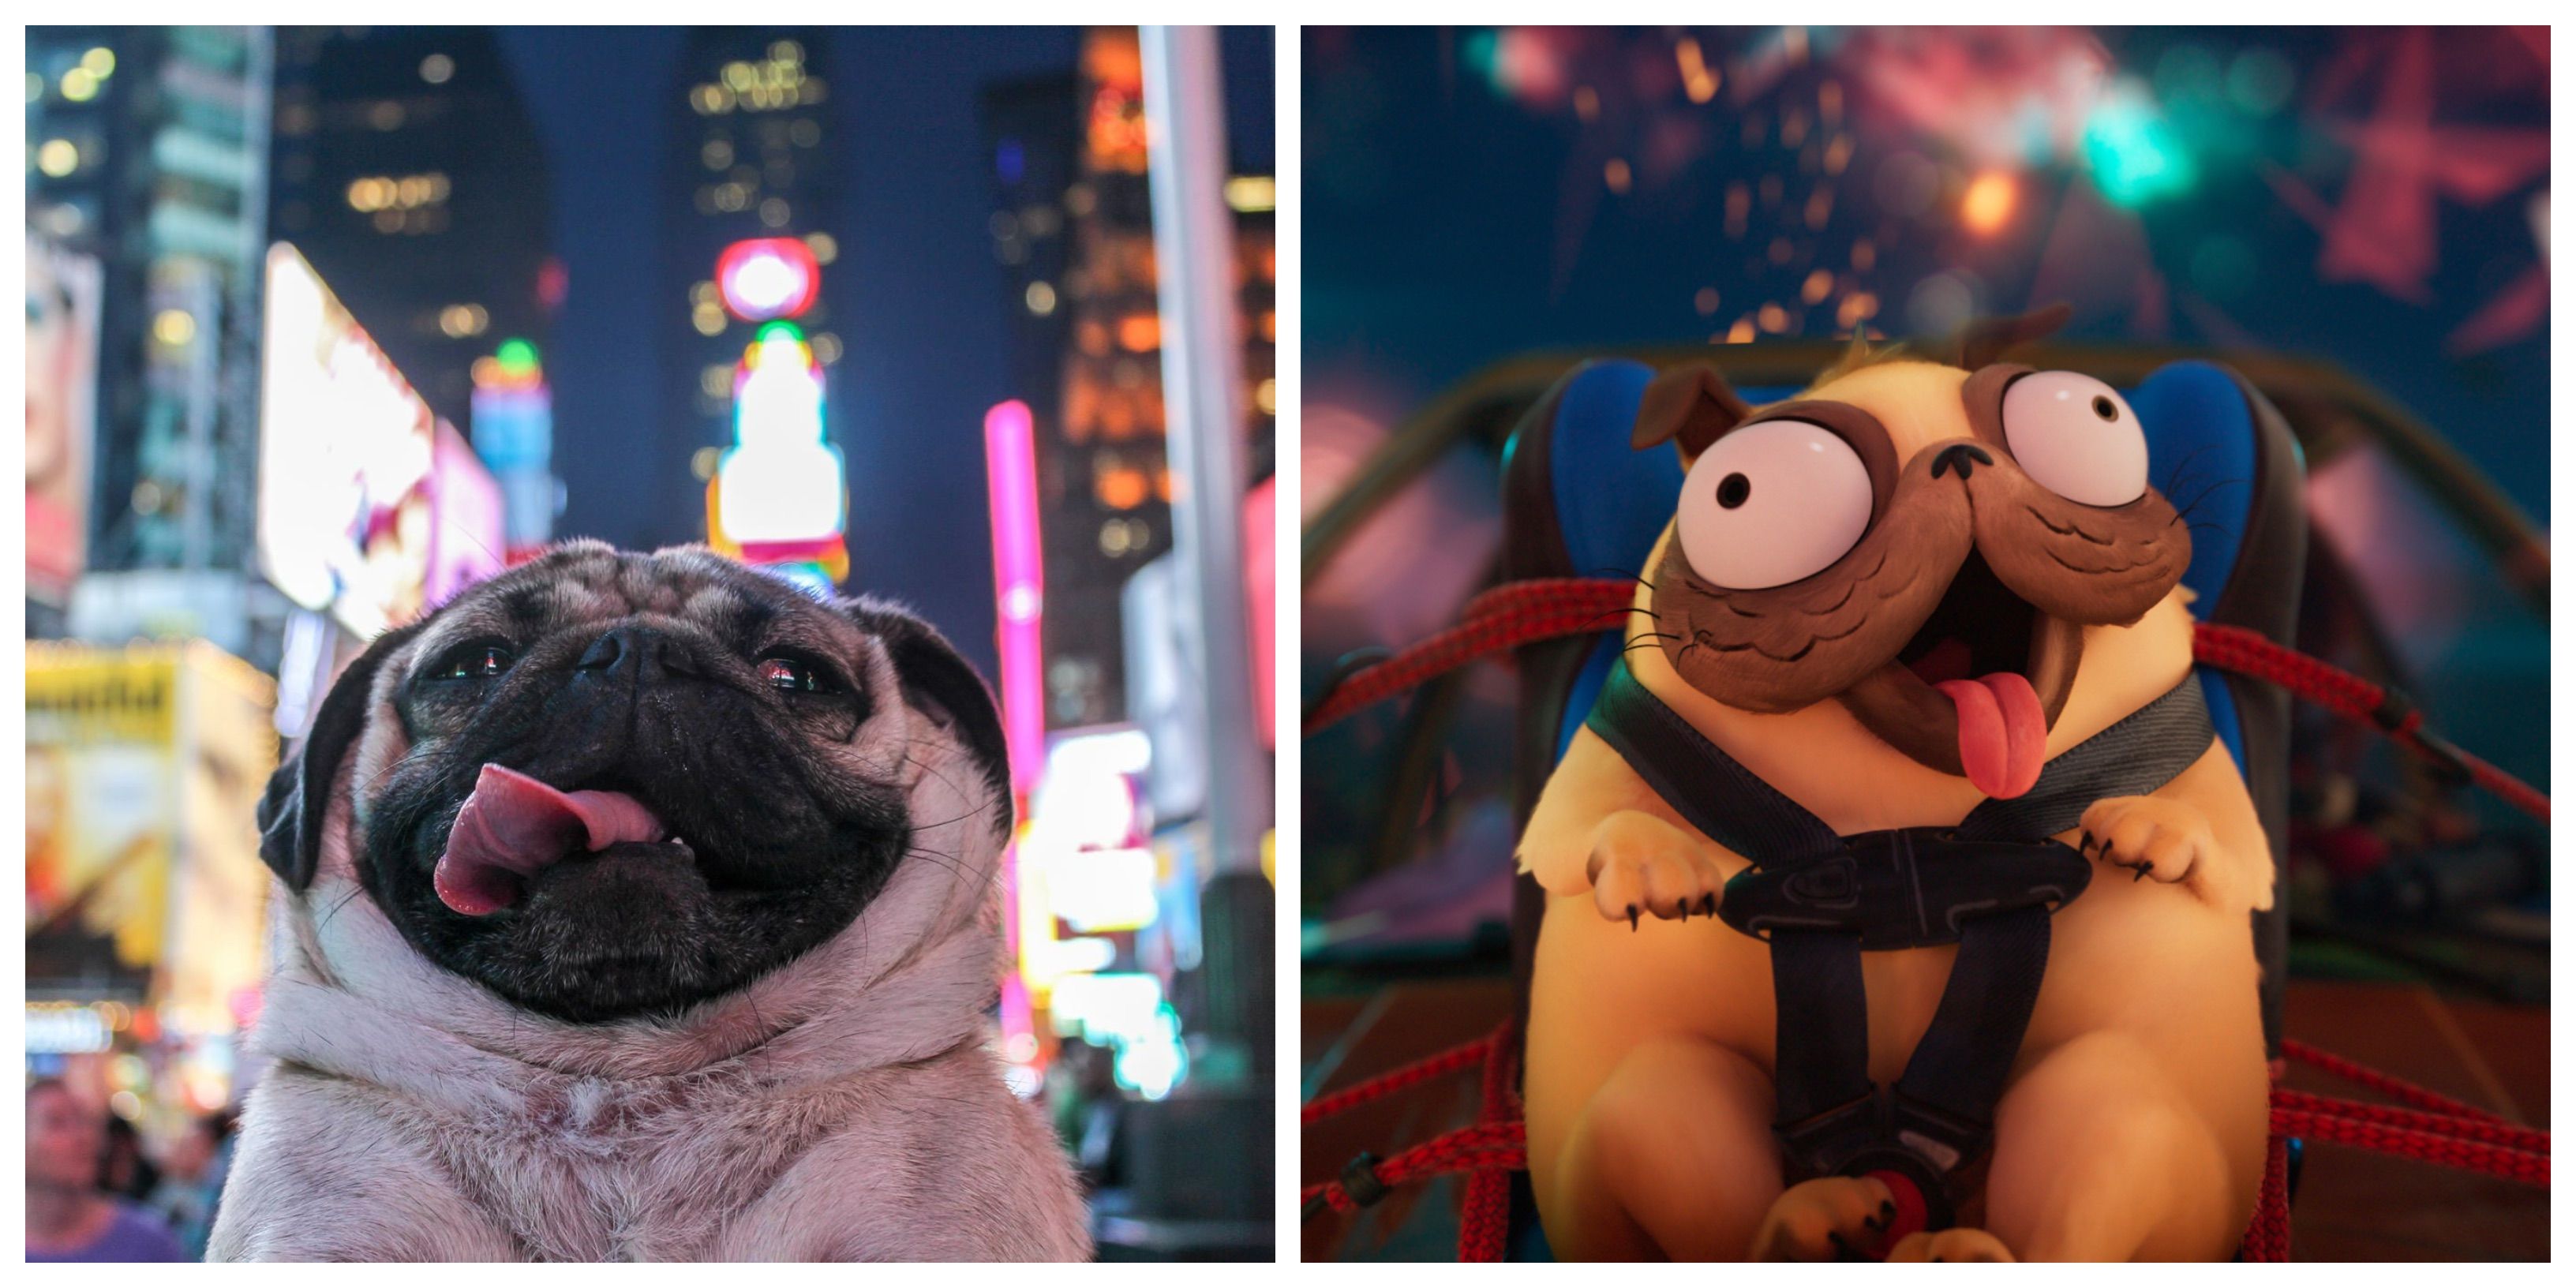 Doug the Pug as Monchi in The Mitchells vs. the Machines on Netflix